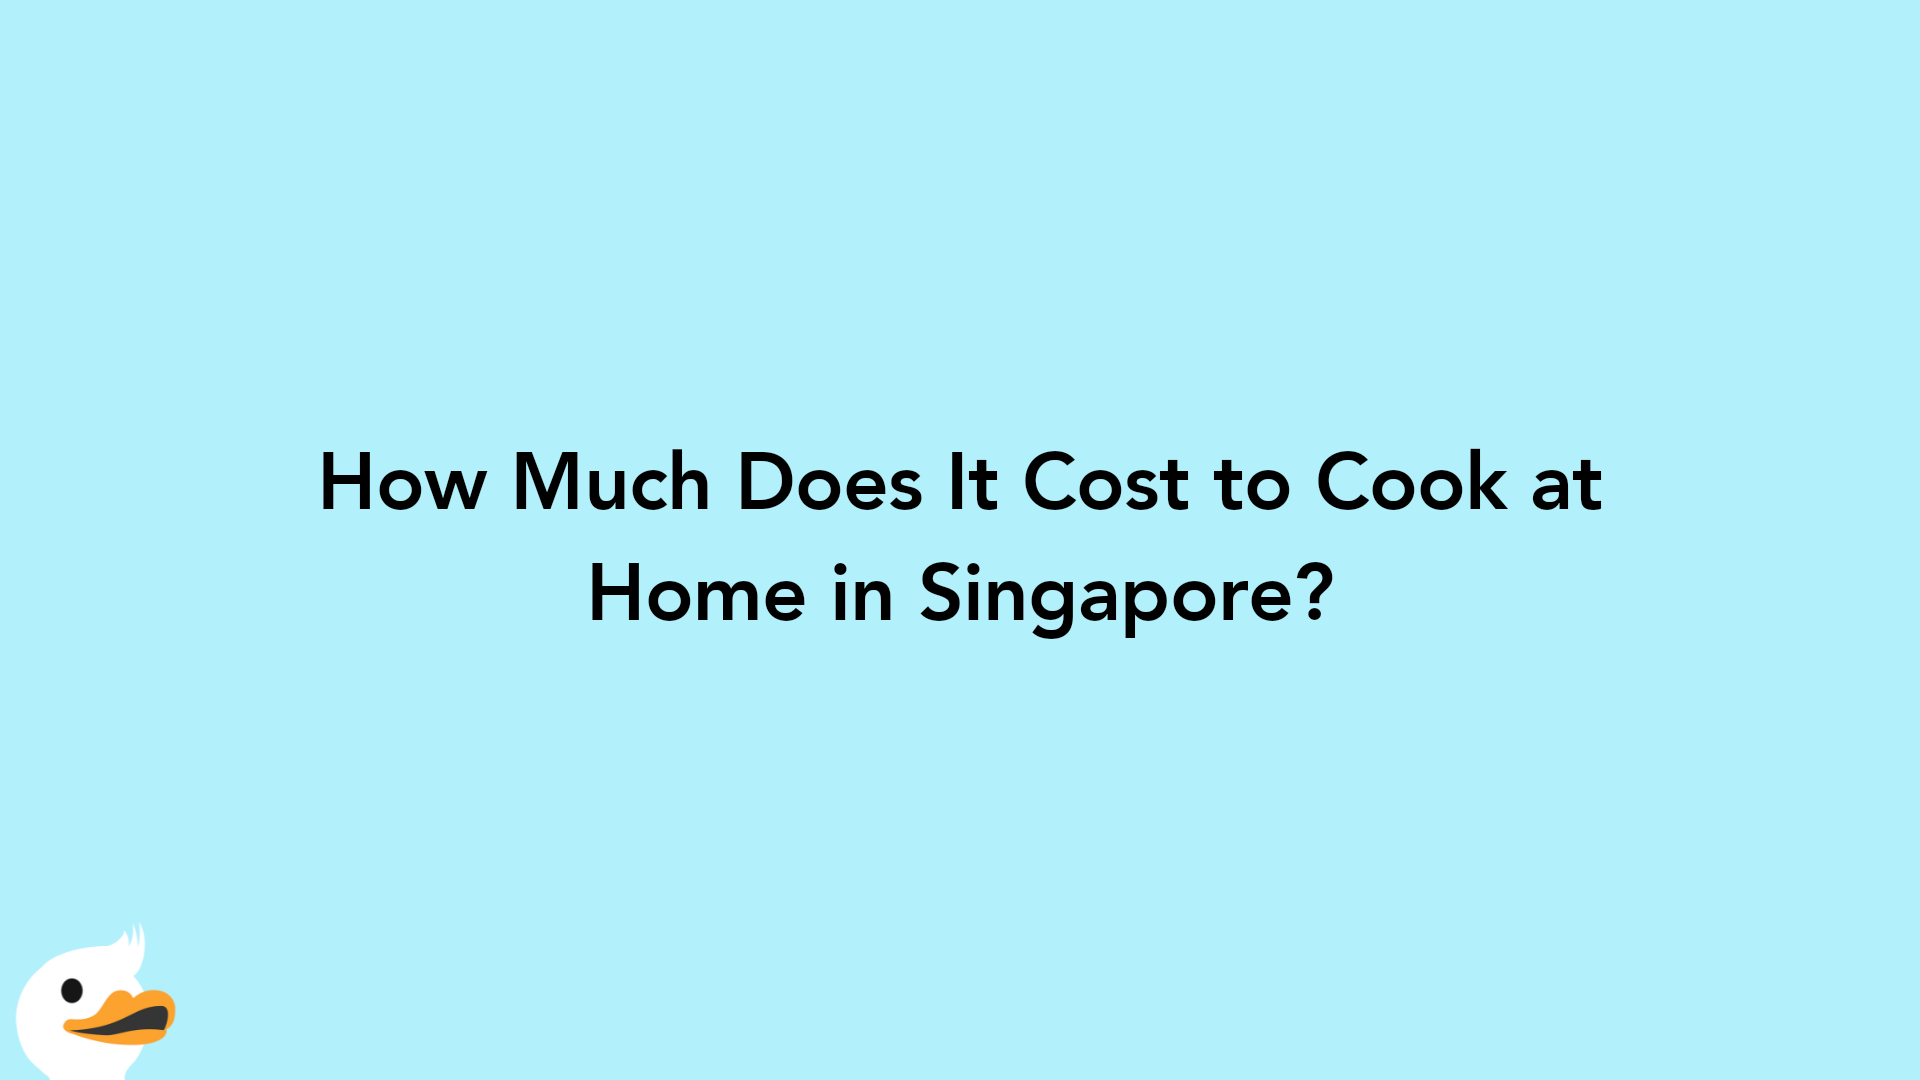 How Much Does It Cost to Cook at Home in Singapore?